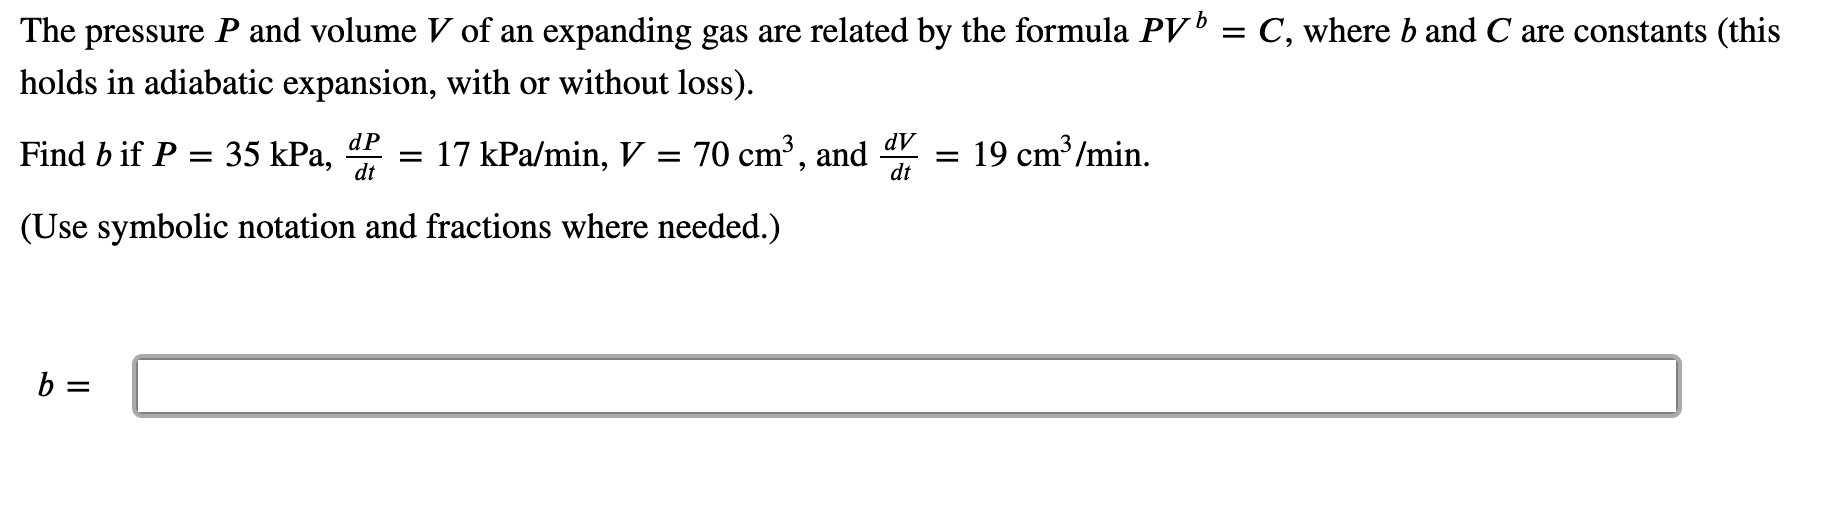 The pressure P and volume V of an expanding gas are related by the formula PV' = C, where b and C are constants (this
holds in adiabatic expansion, with or without loss).
dP
dV
Find b if P = 35 kPa,
dt
= 17 kPa/min, V = 70 cm³, and
dt
= 19 cm³/min.
(Use symbolic notation and fractions where needed.)
b =
